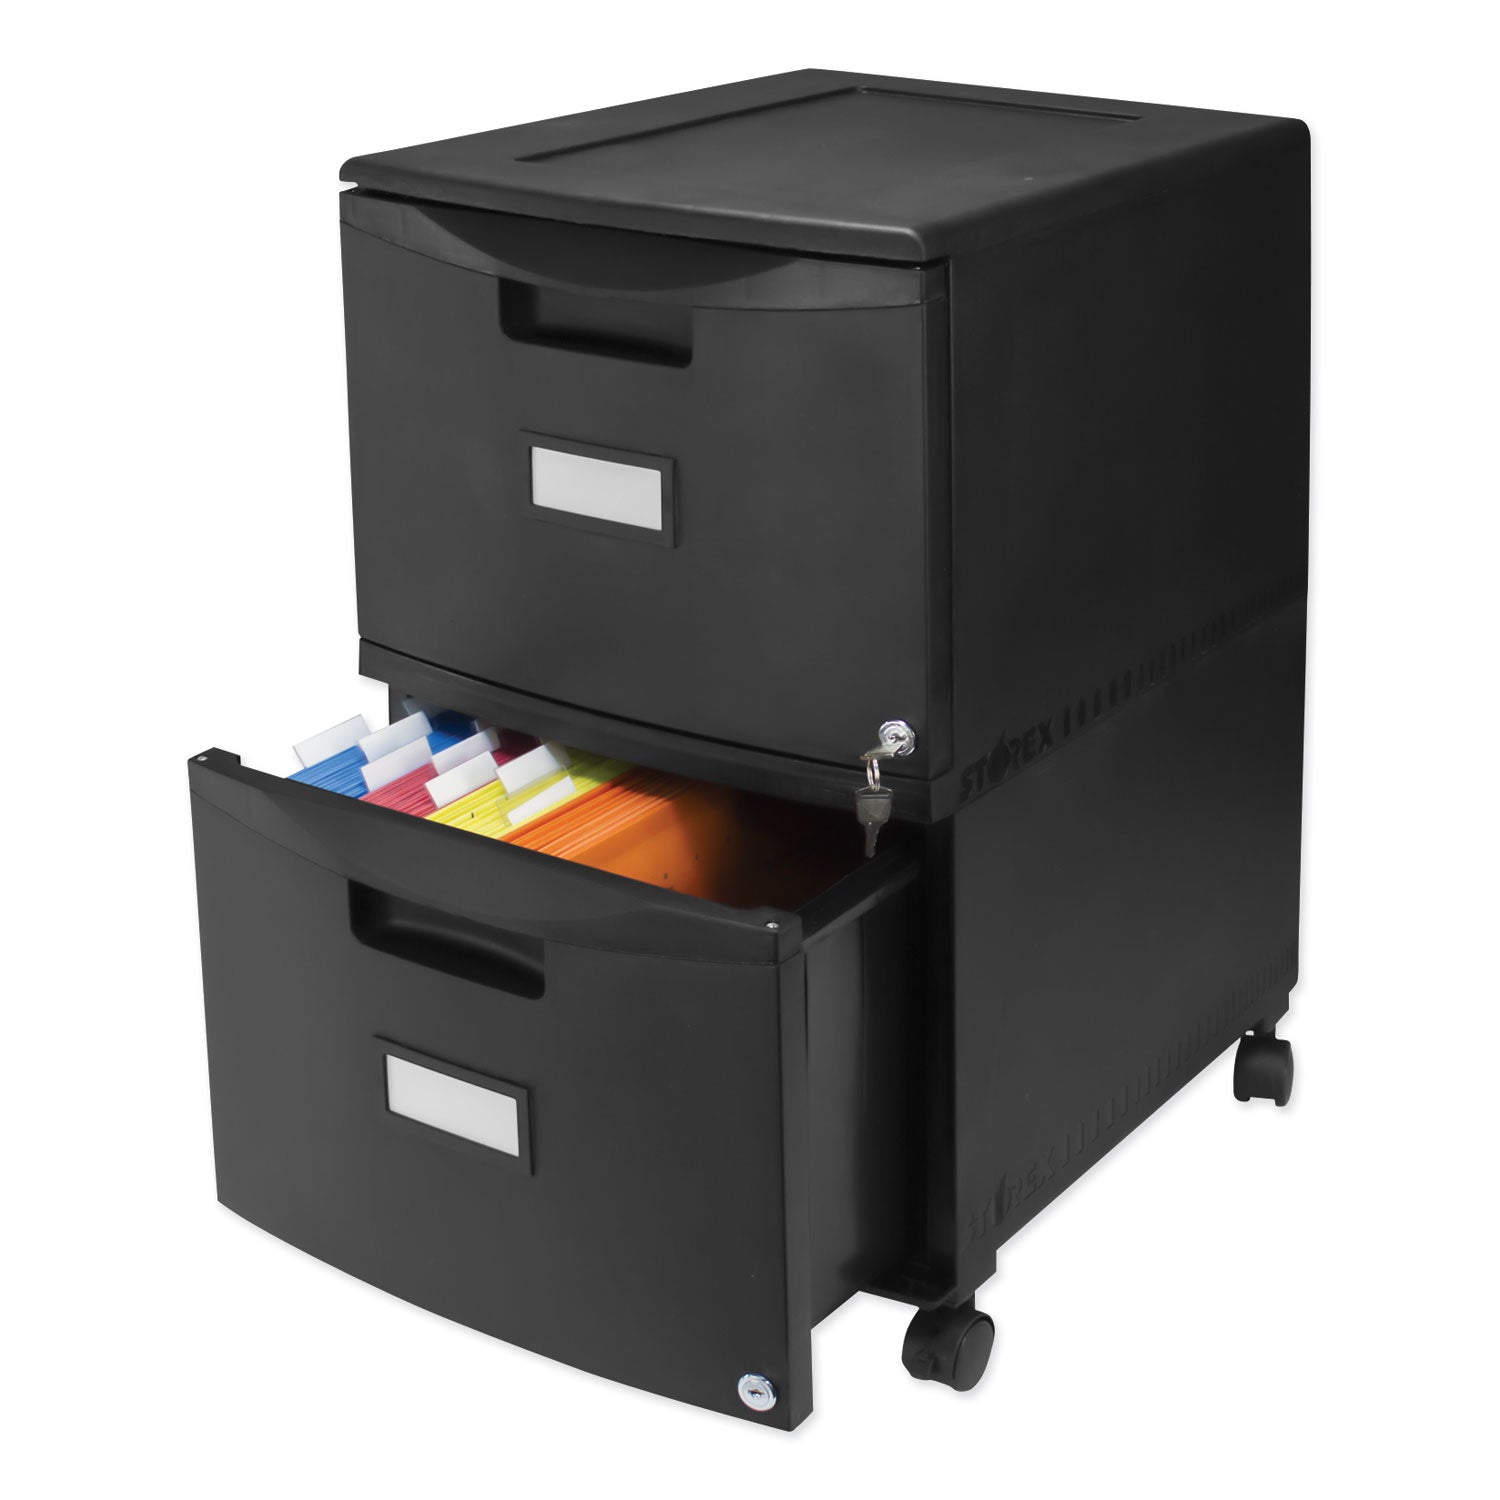 two-drawer-mobile-filing-cabinet-2-legal-letter-size-file-drawers-black-1475-x-1825-x-26_stx61312b01c - 6